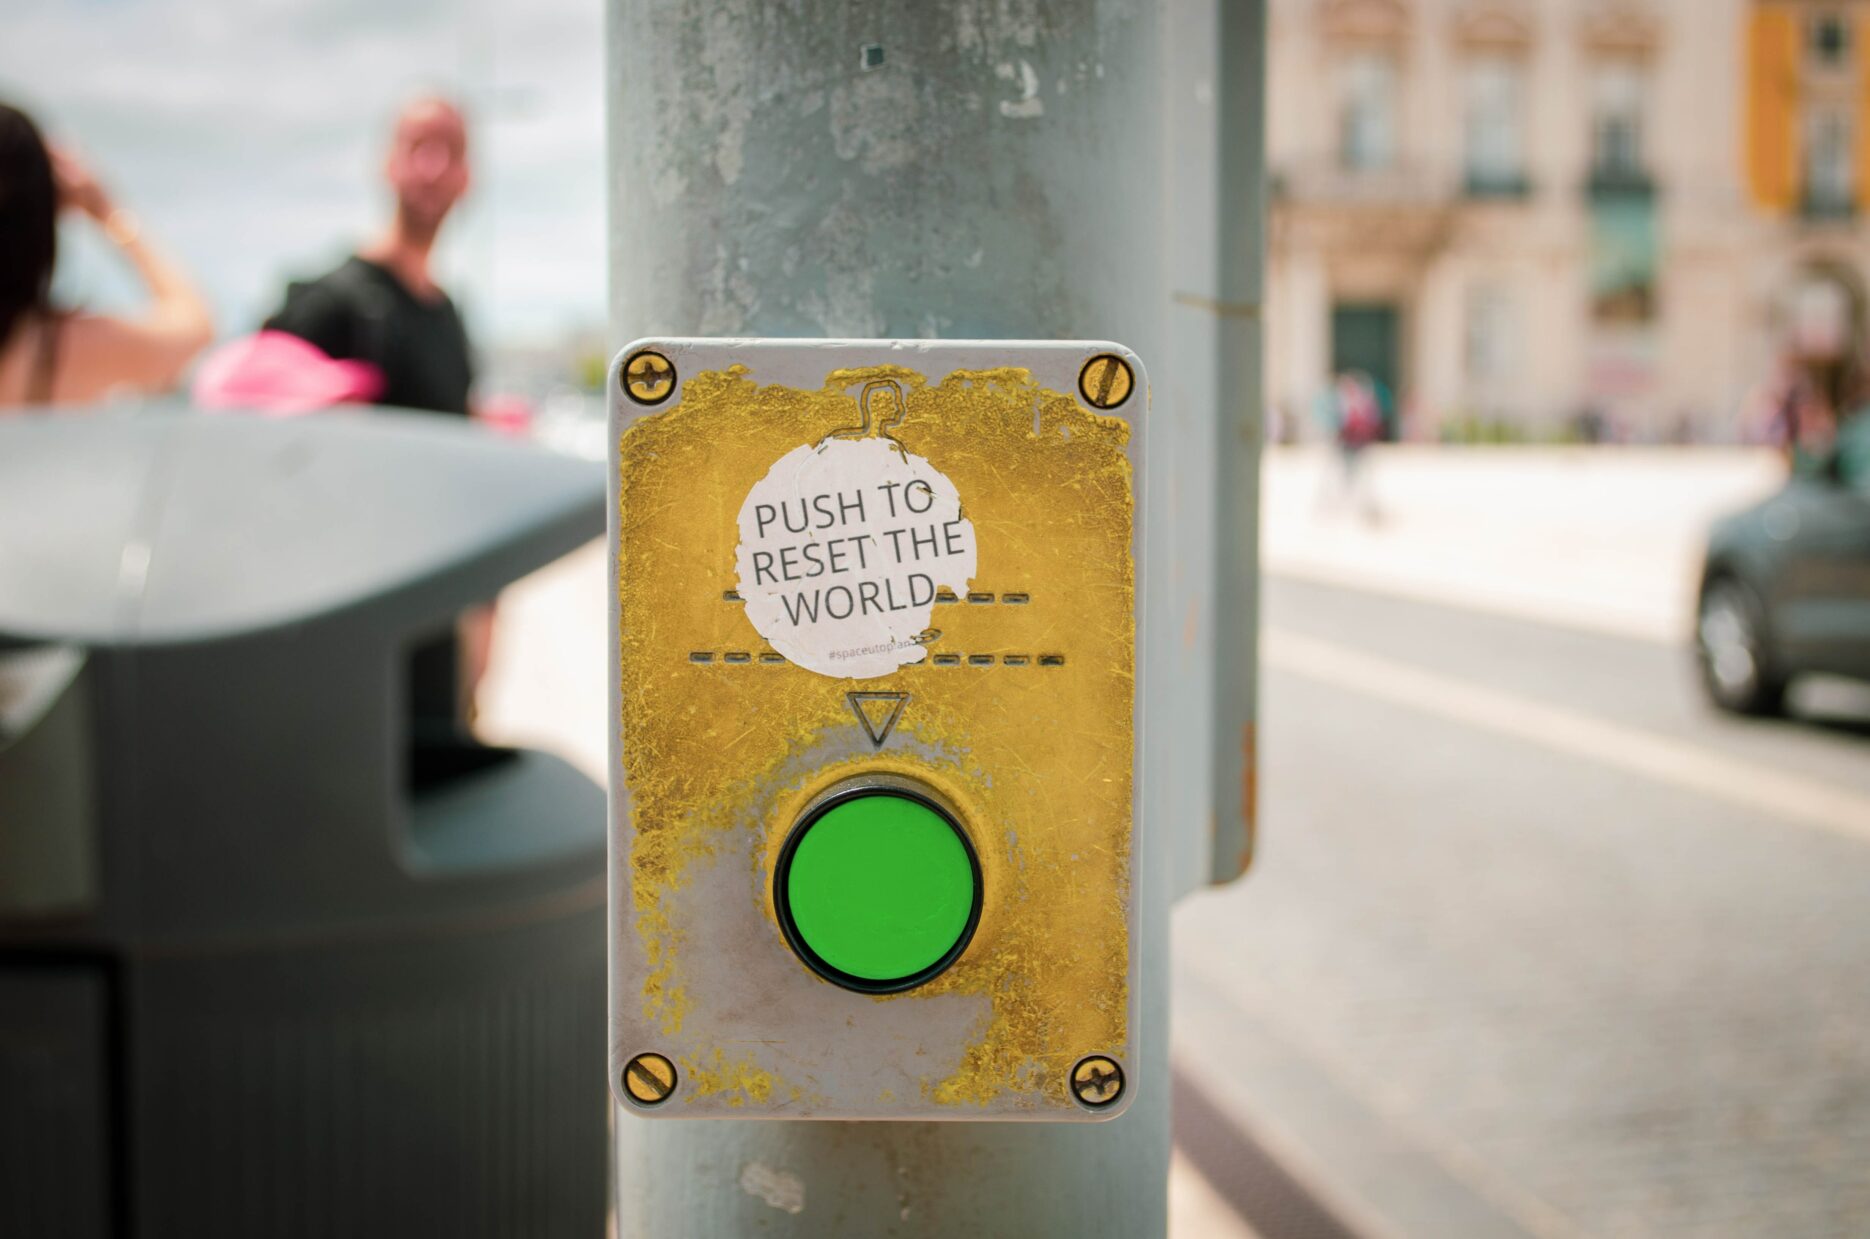 A pedestrian crossing button has been modified with a sticker that says, "Push to reset the world."